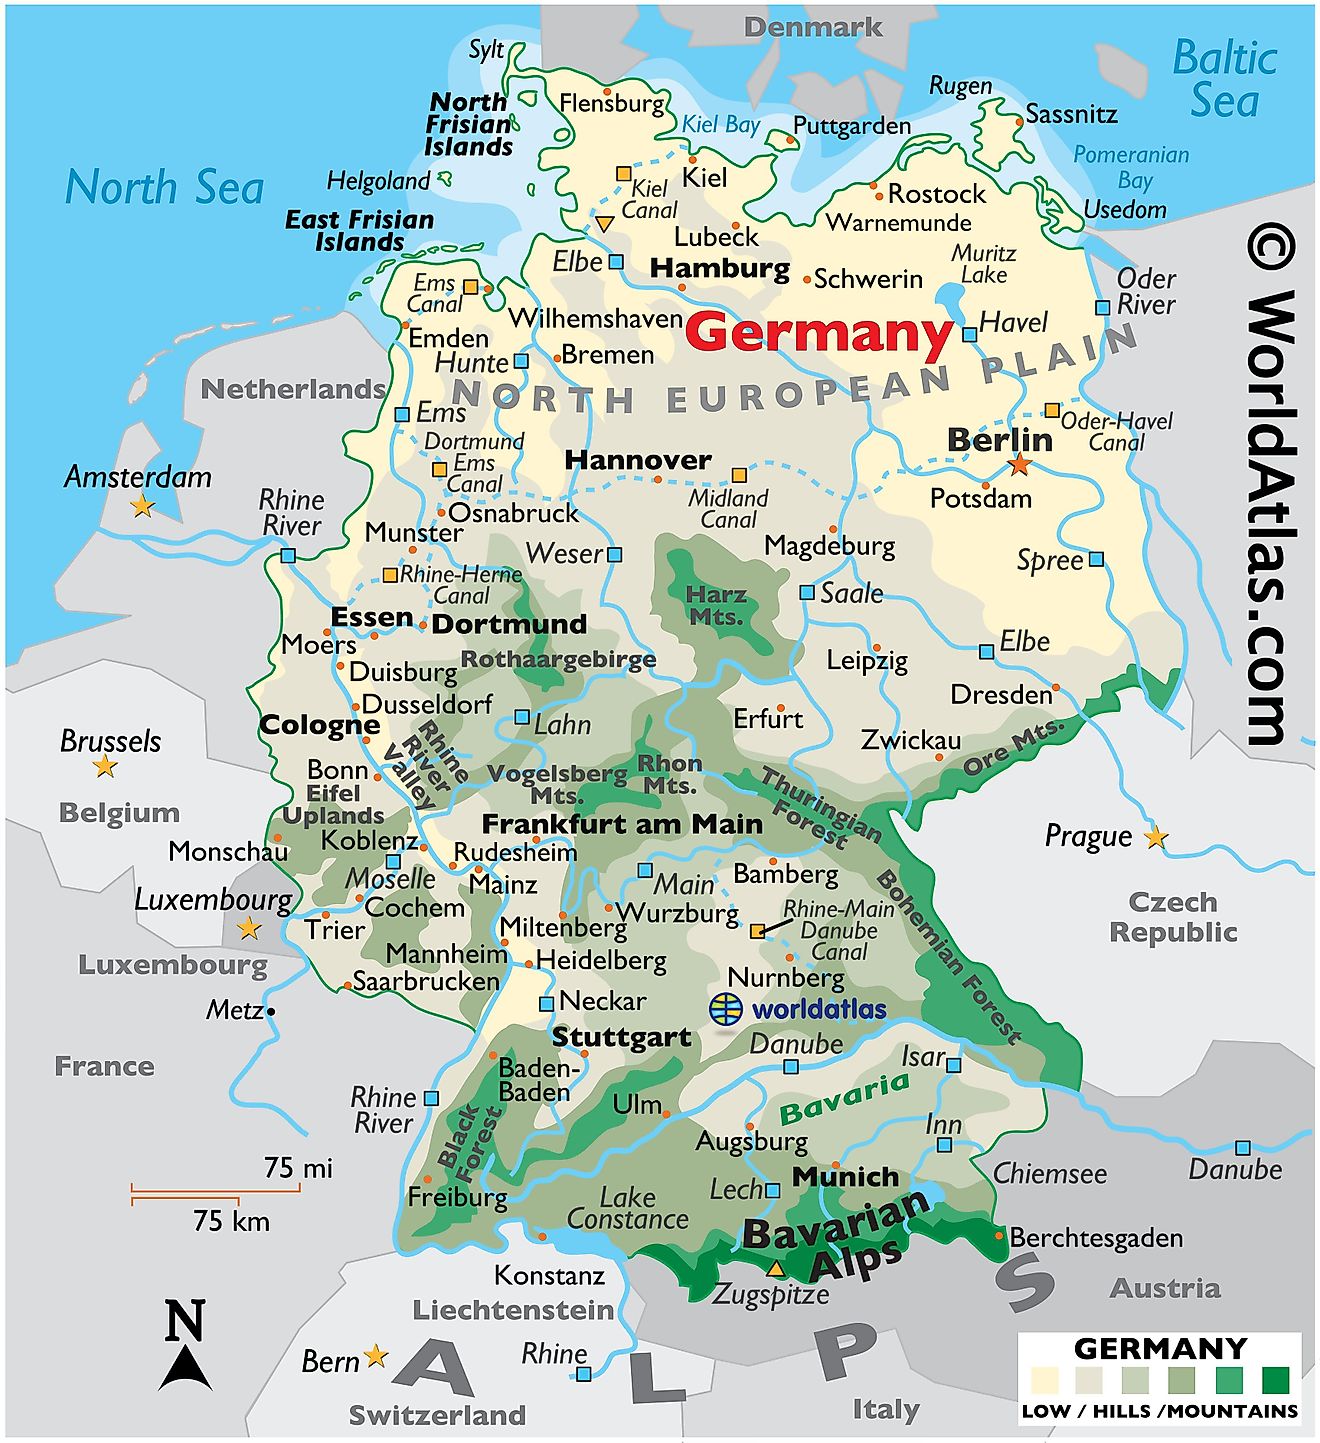 Physical Map of the Germany showing terrain, mountain ranges, extreme points, major rivers, important cities, international boundaries, etc.